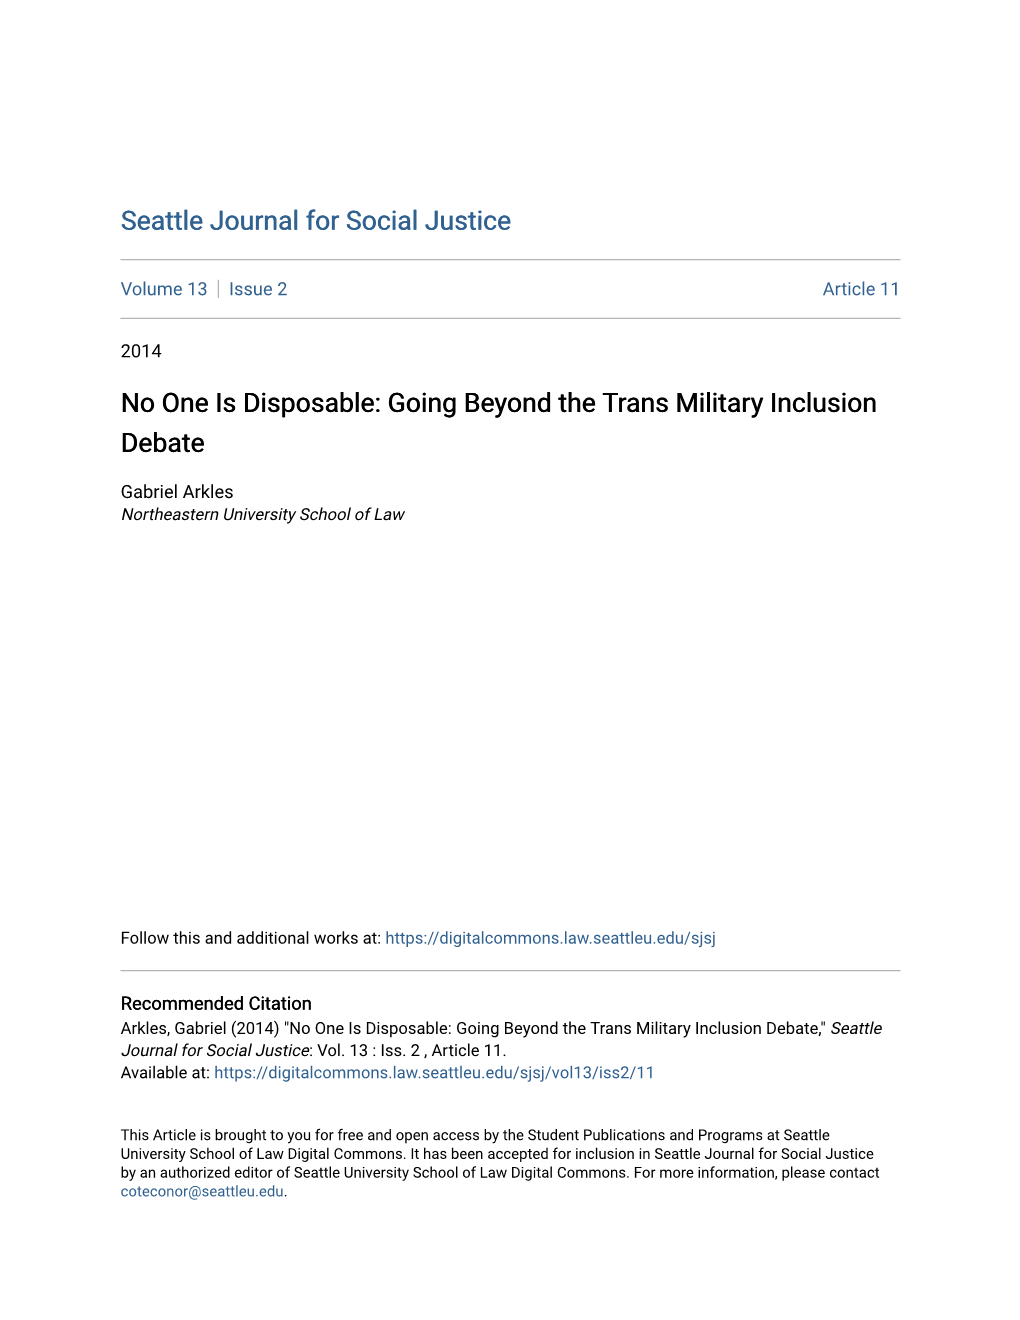 No One Is Disposable: Going Beyond the Trans Military Inclusion Debate